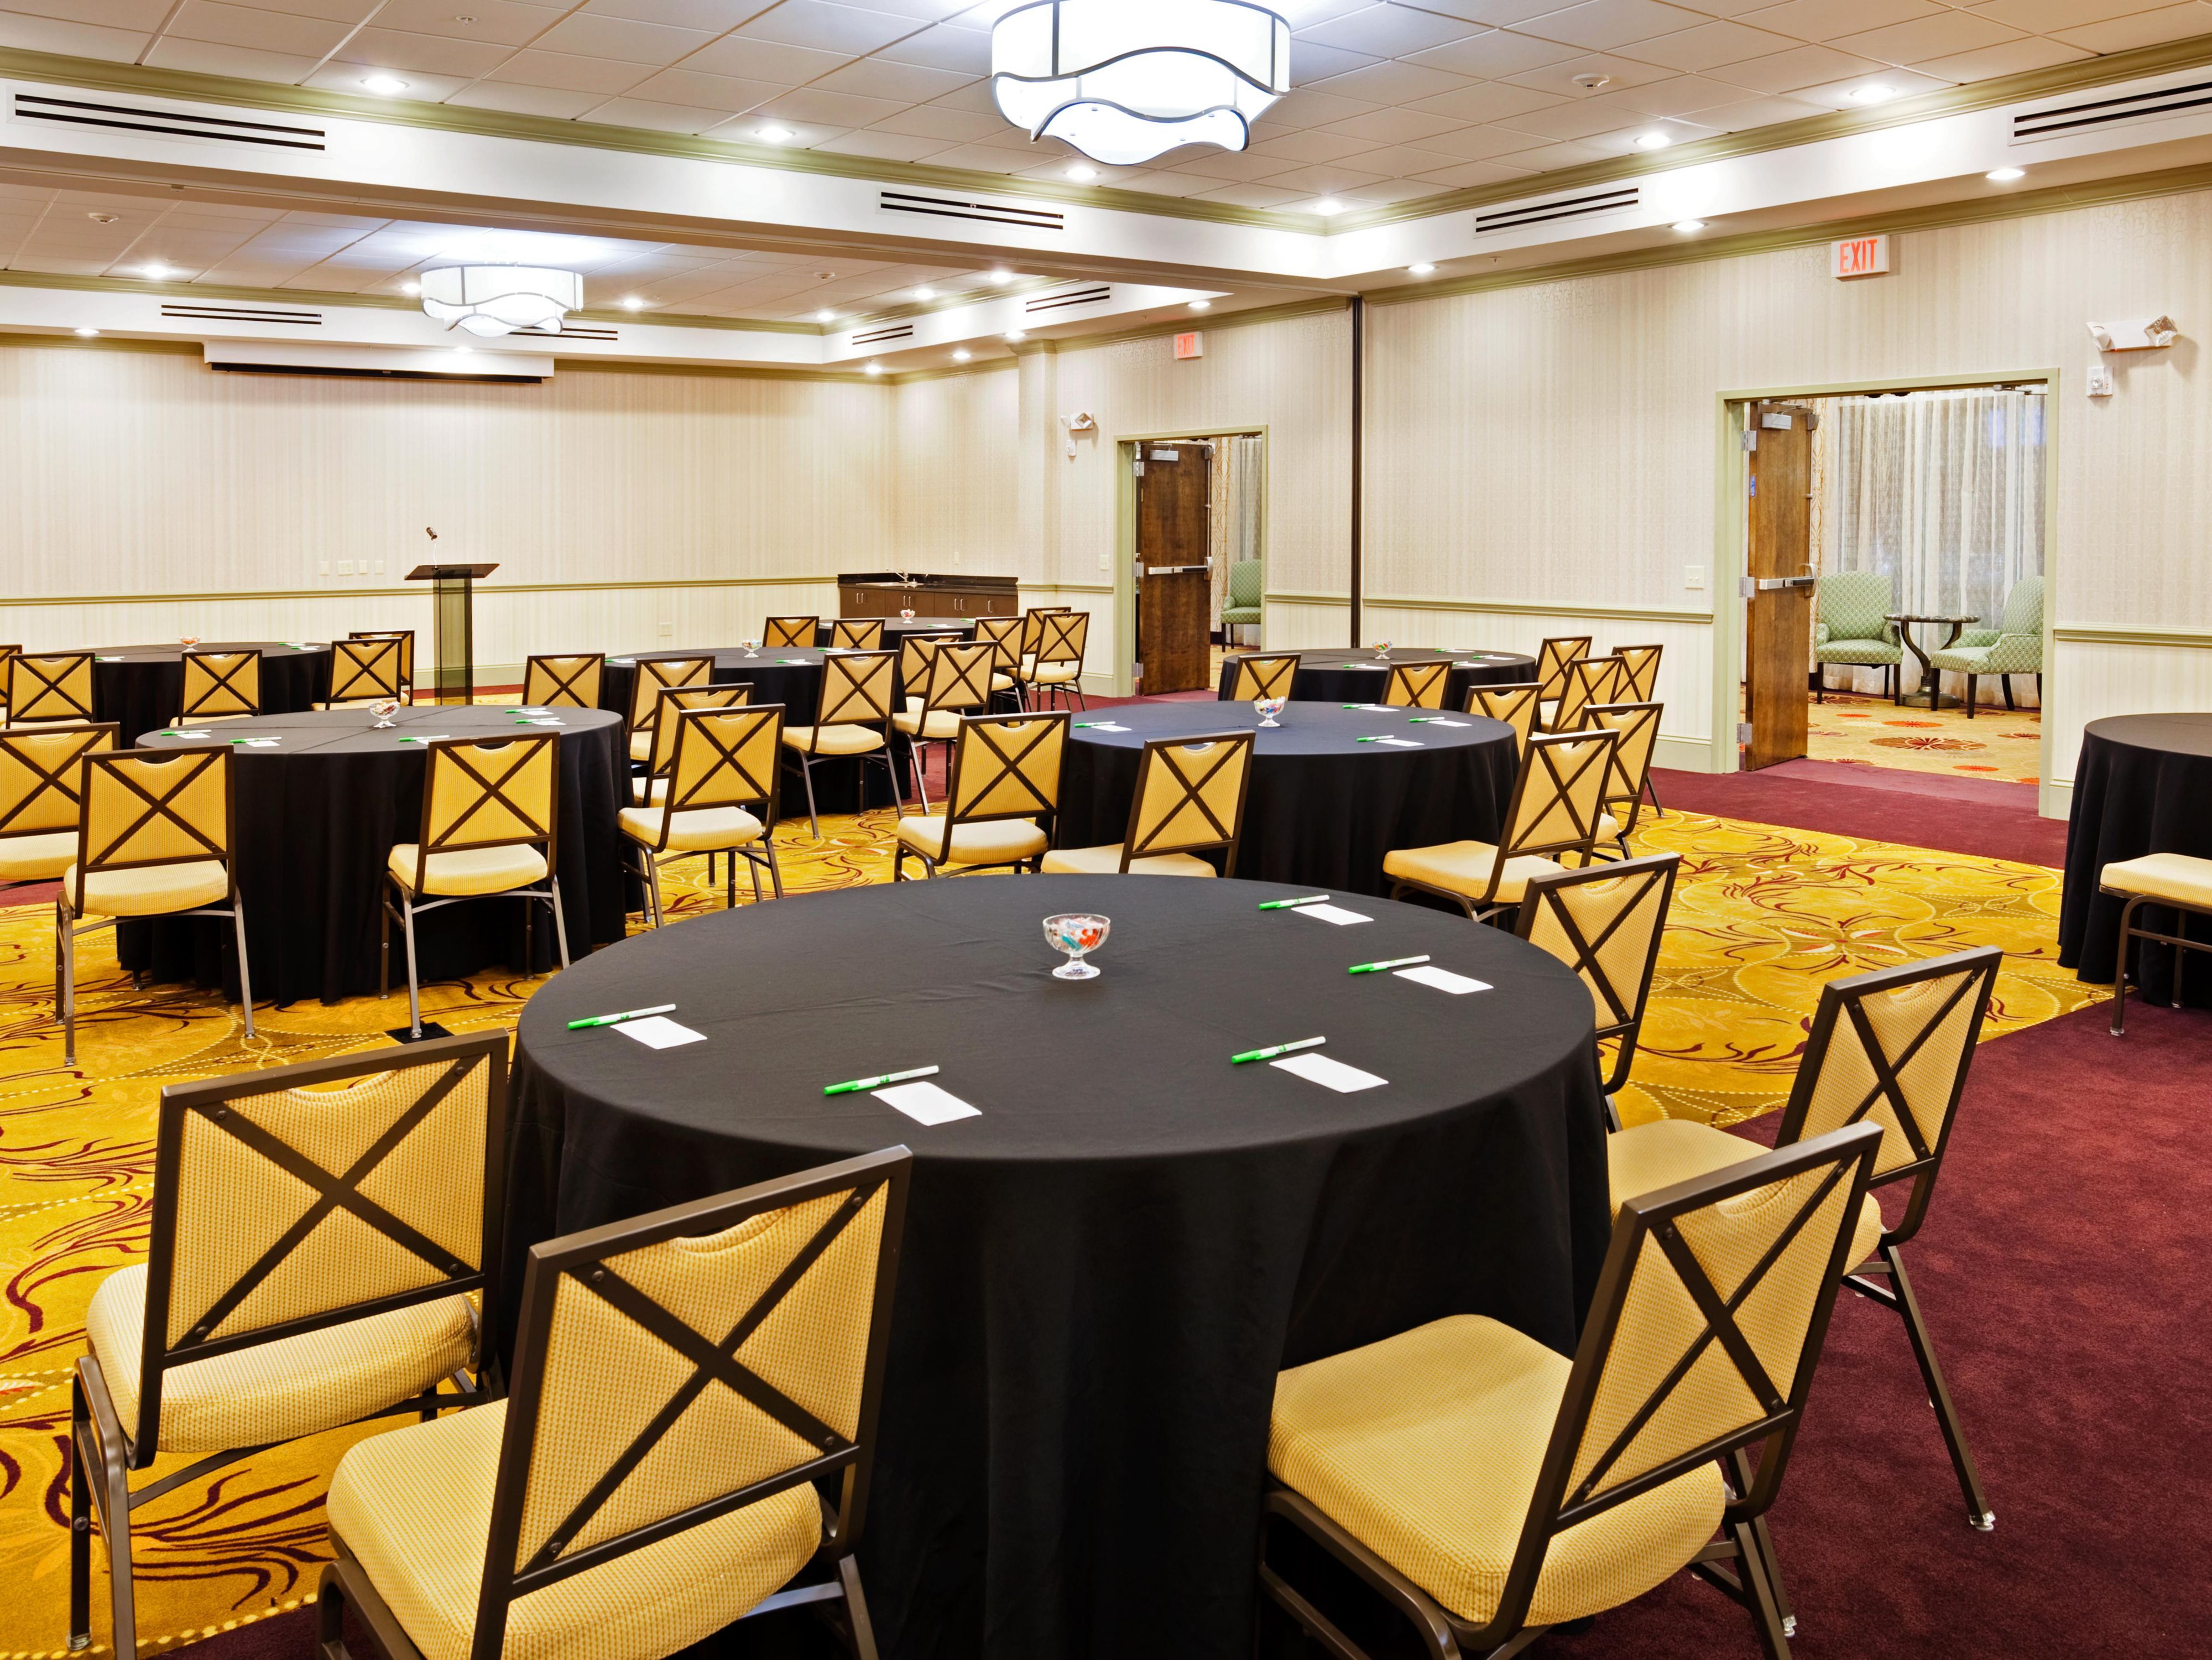 We cater towards business meetings, wedding receptions, birthday parties and more! Our largest space is 2,400 square feet and our smallest being 800 square feet.